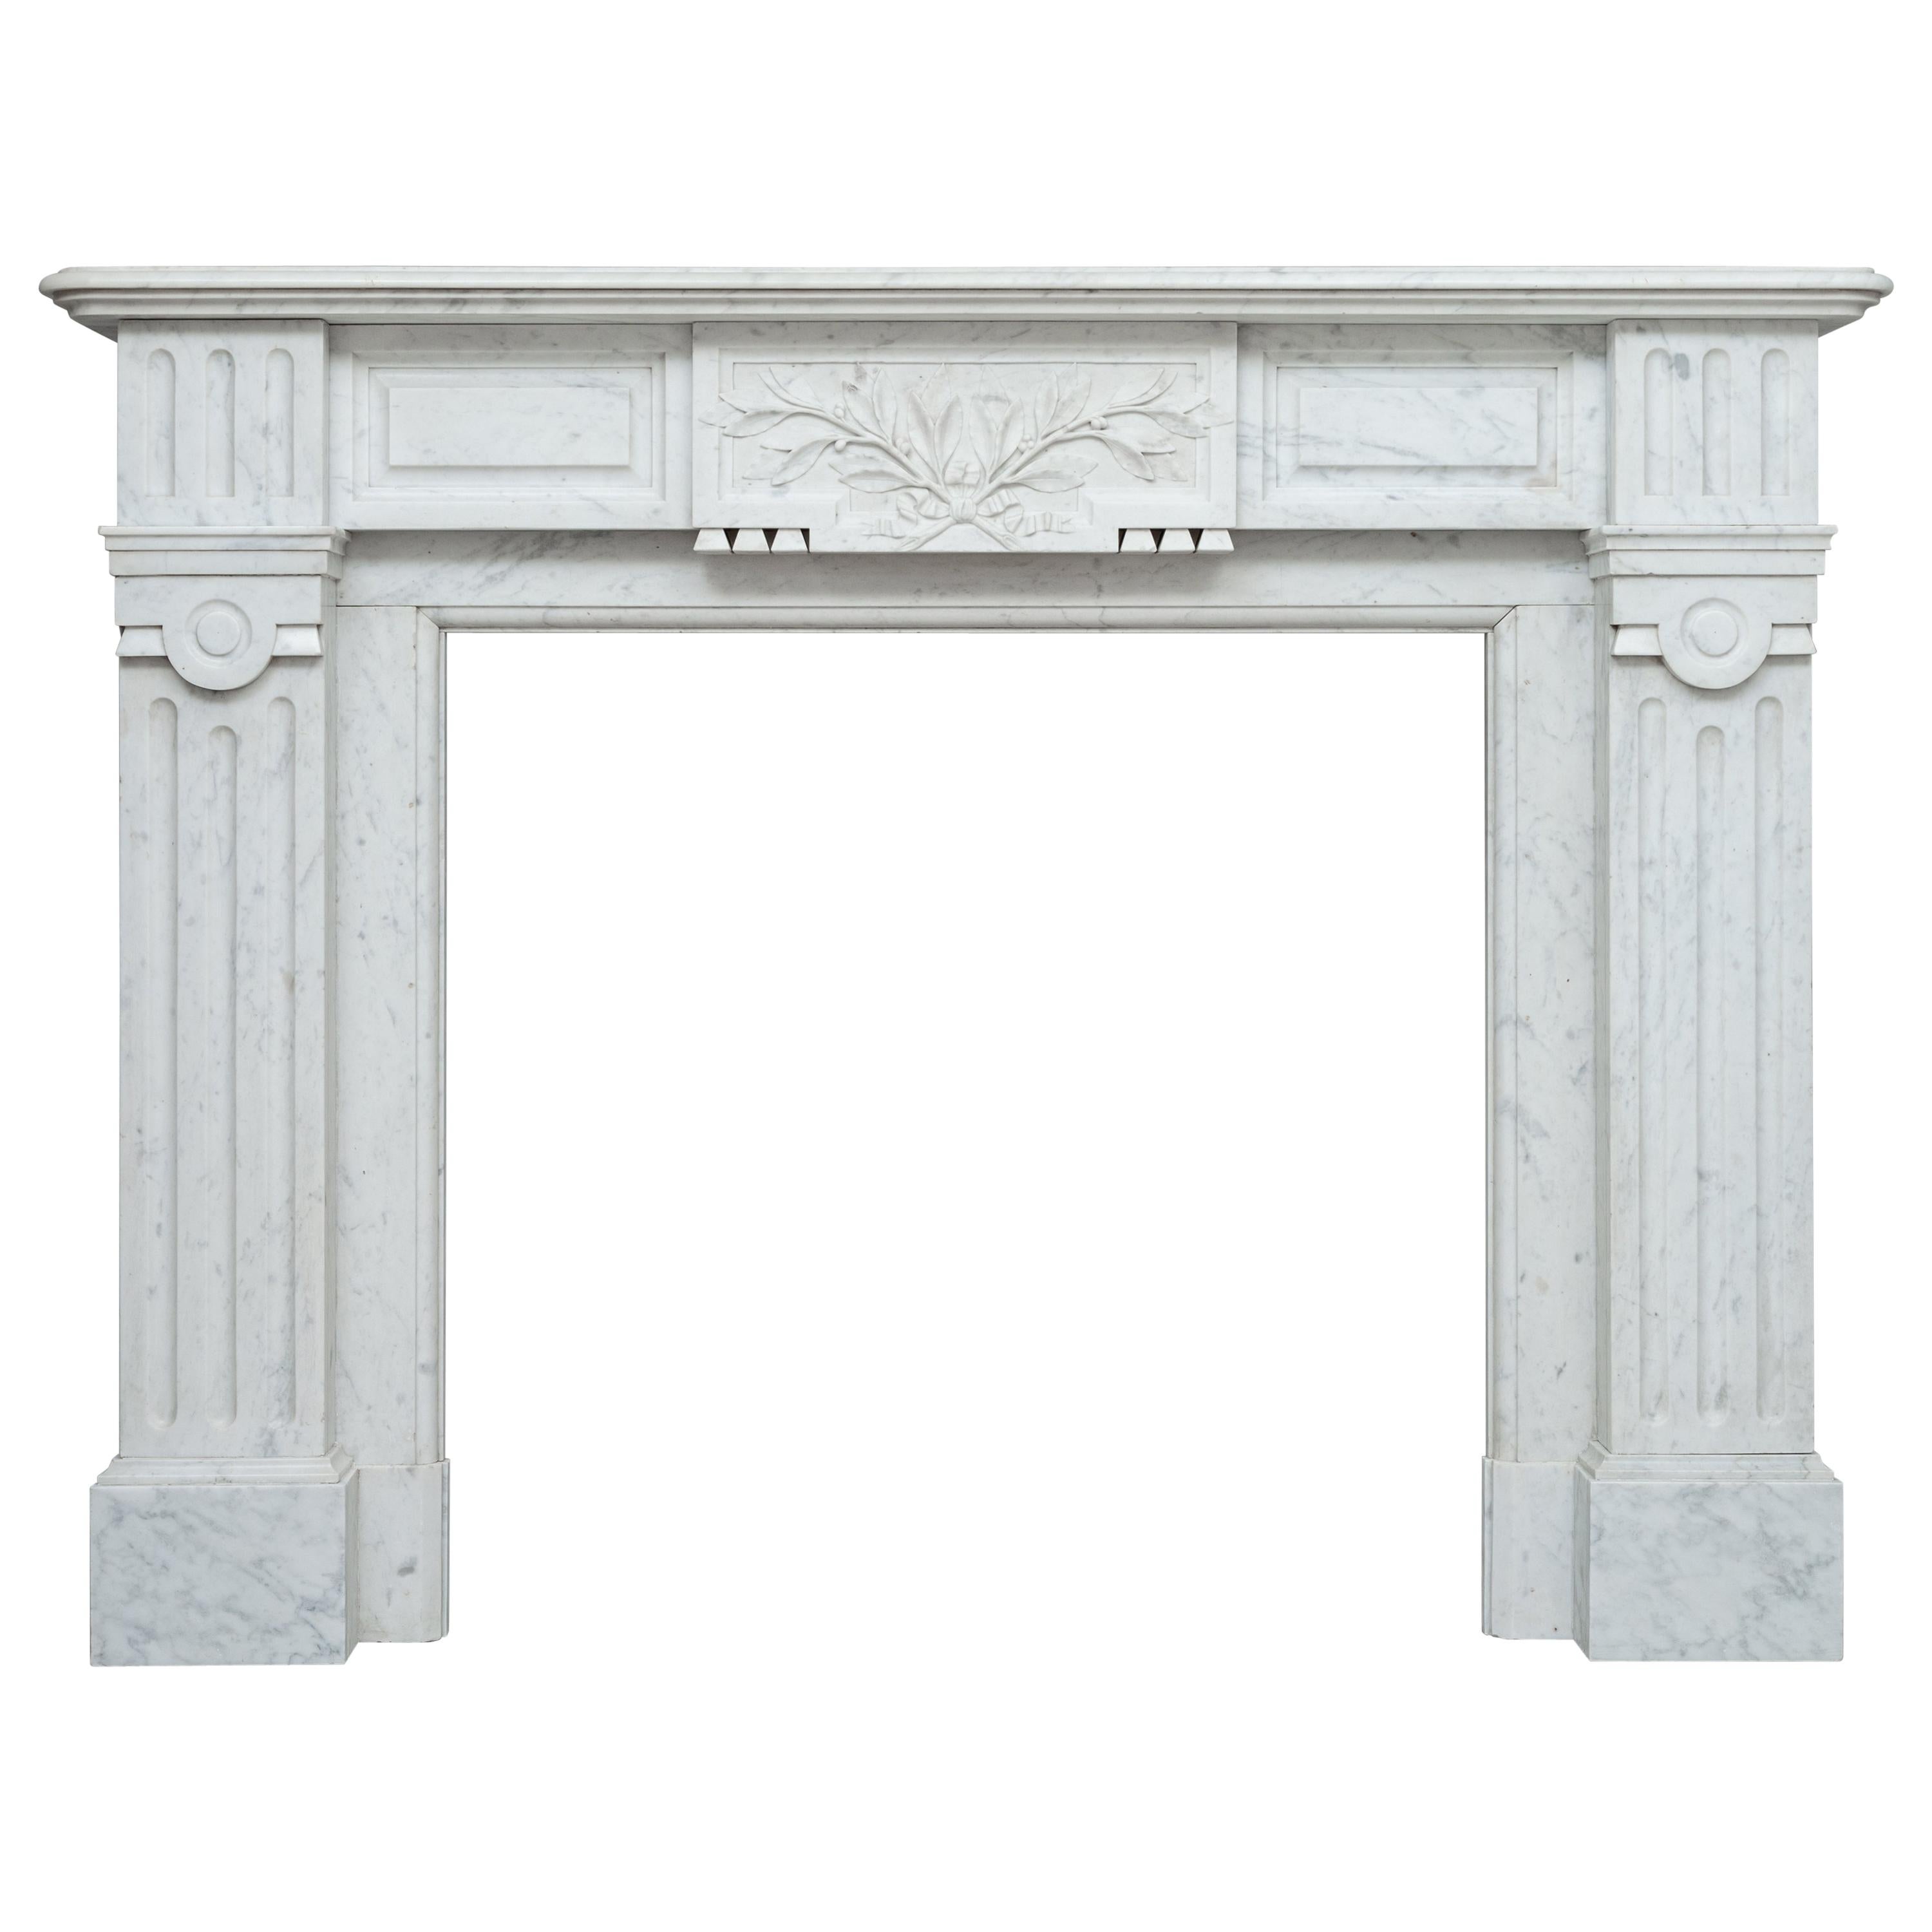 Neoclassic French White Carrara Marble Antique Fireplace